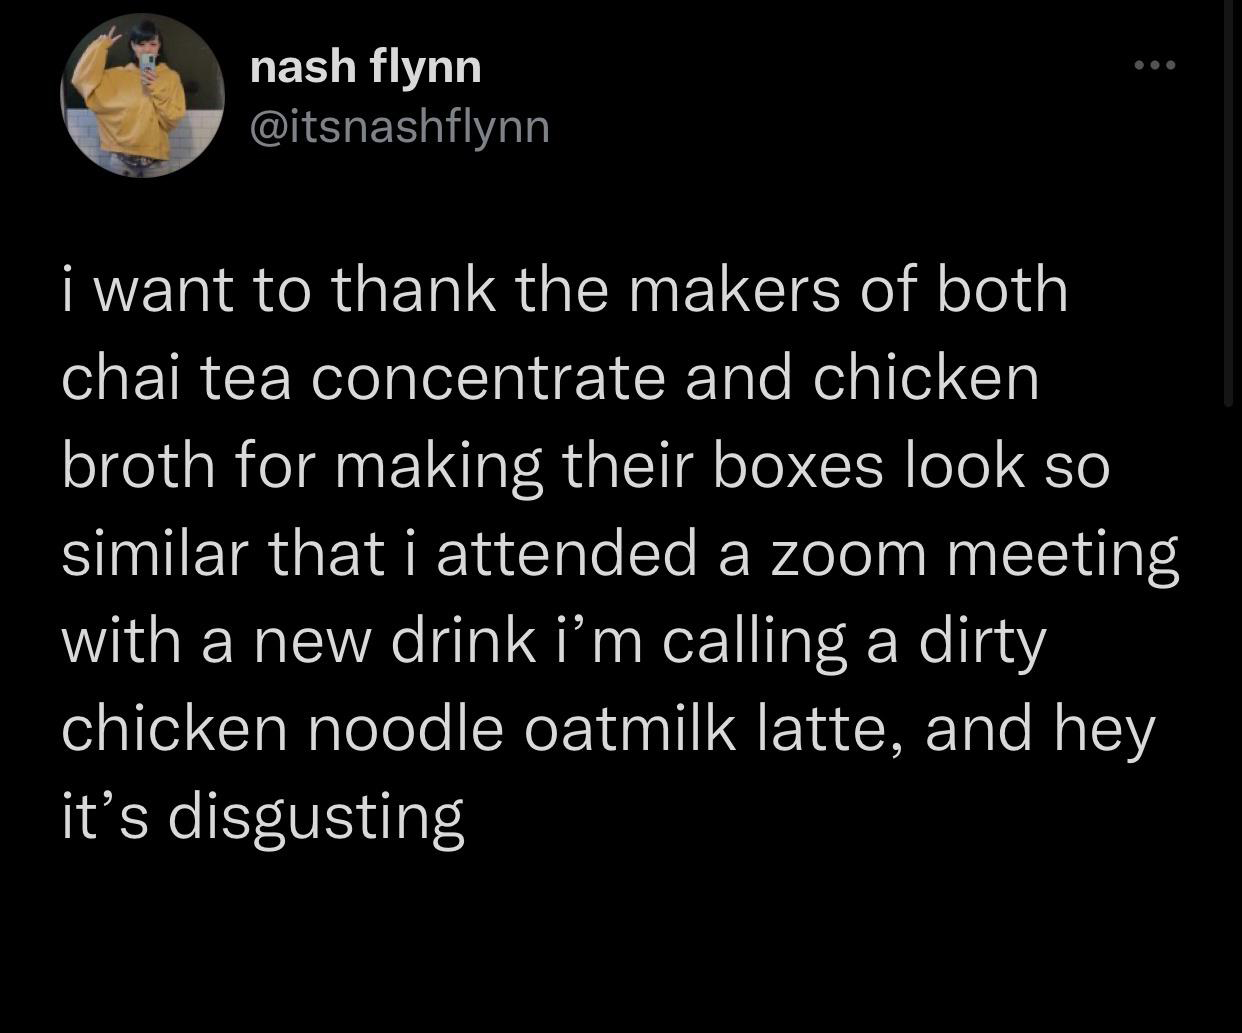 funny tweets and twitter memes - ... nash flynn i want to thank the makers of both chai tea concentrate and chicken broth for making their boxes look so similar that i attended a zoom meeting with a new drink i'm calling a dirty chicken noodle oatmilk lat